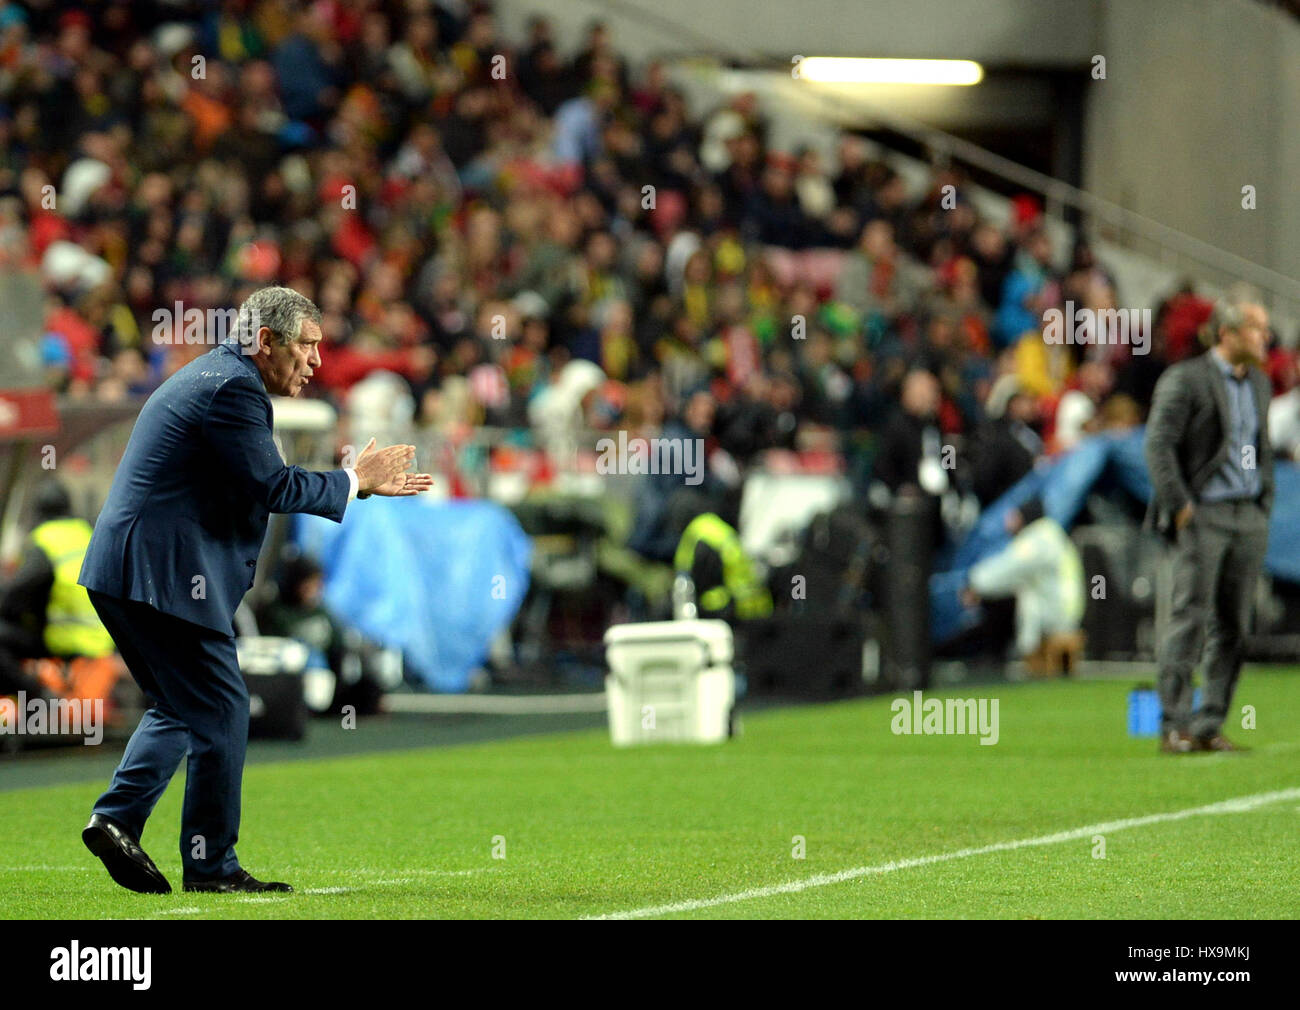 Lisbon, Portugal. 25th Mar, 2017. Fernando Santos(L), head coach of Portugal reacts during the FIFA World Cup 2018 Qualifiers Group B match between Portugal and Hungary at the Luz stadium in Lisbon, Portugal, on March 25, 2017. Portugal won 3-0. Credit: Zhang Liyun/Xinhua/Alamy Live News Stock Photo